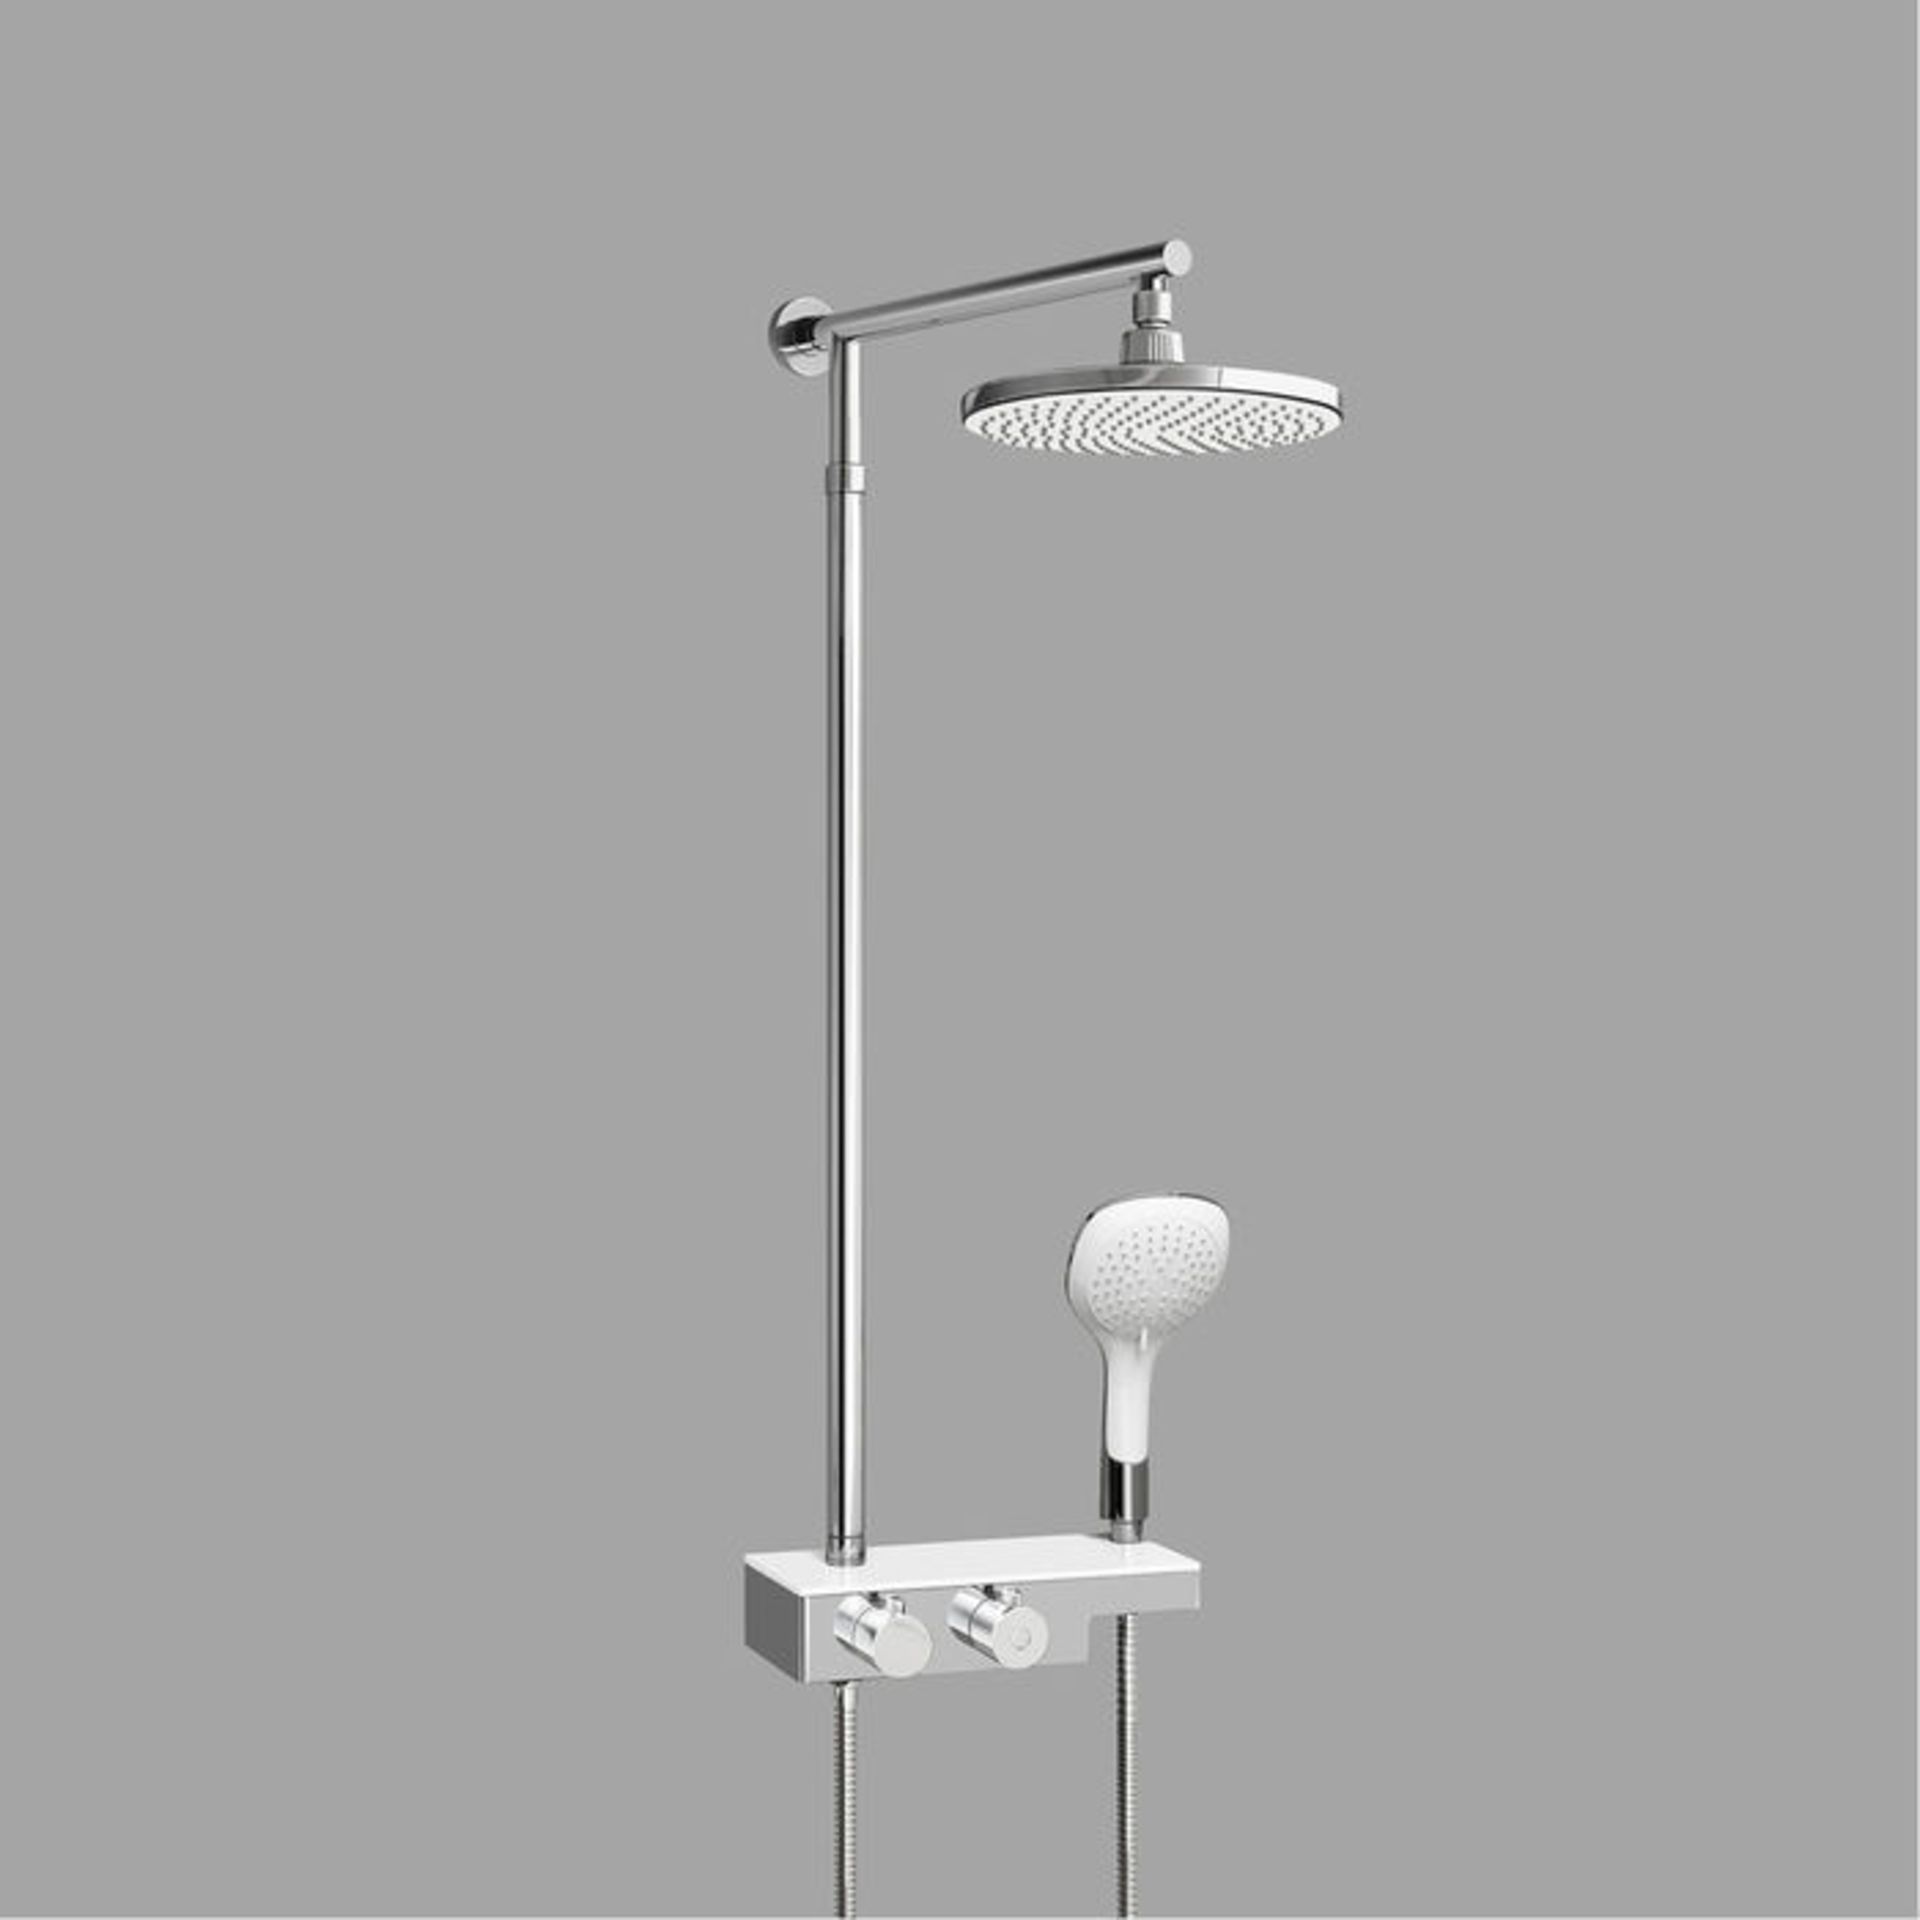 (AH98) Round Exposed Thermostatic Mixer Shower Kit Medium Head & Shelf. Cool to touch shower for - Image 2 of 2